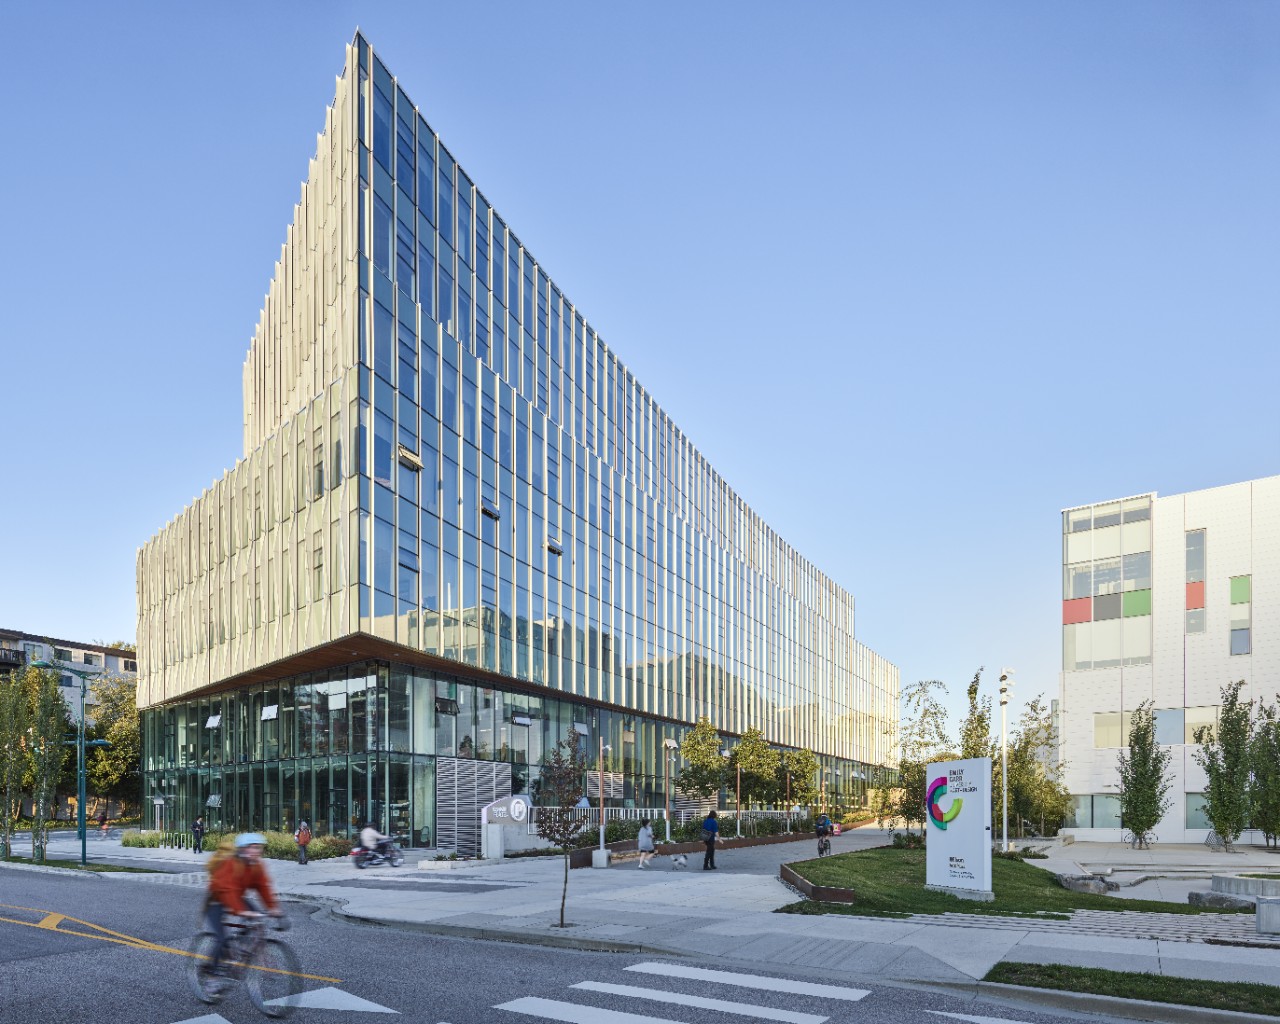 565 Great Northern Way  //  Perkins + Will